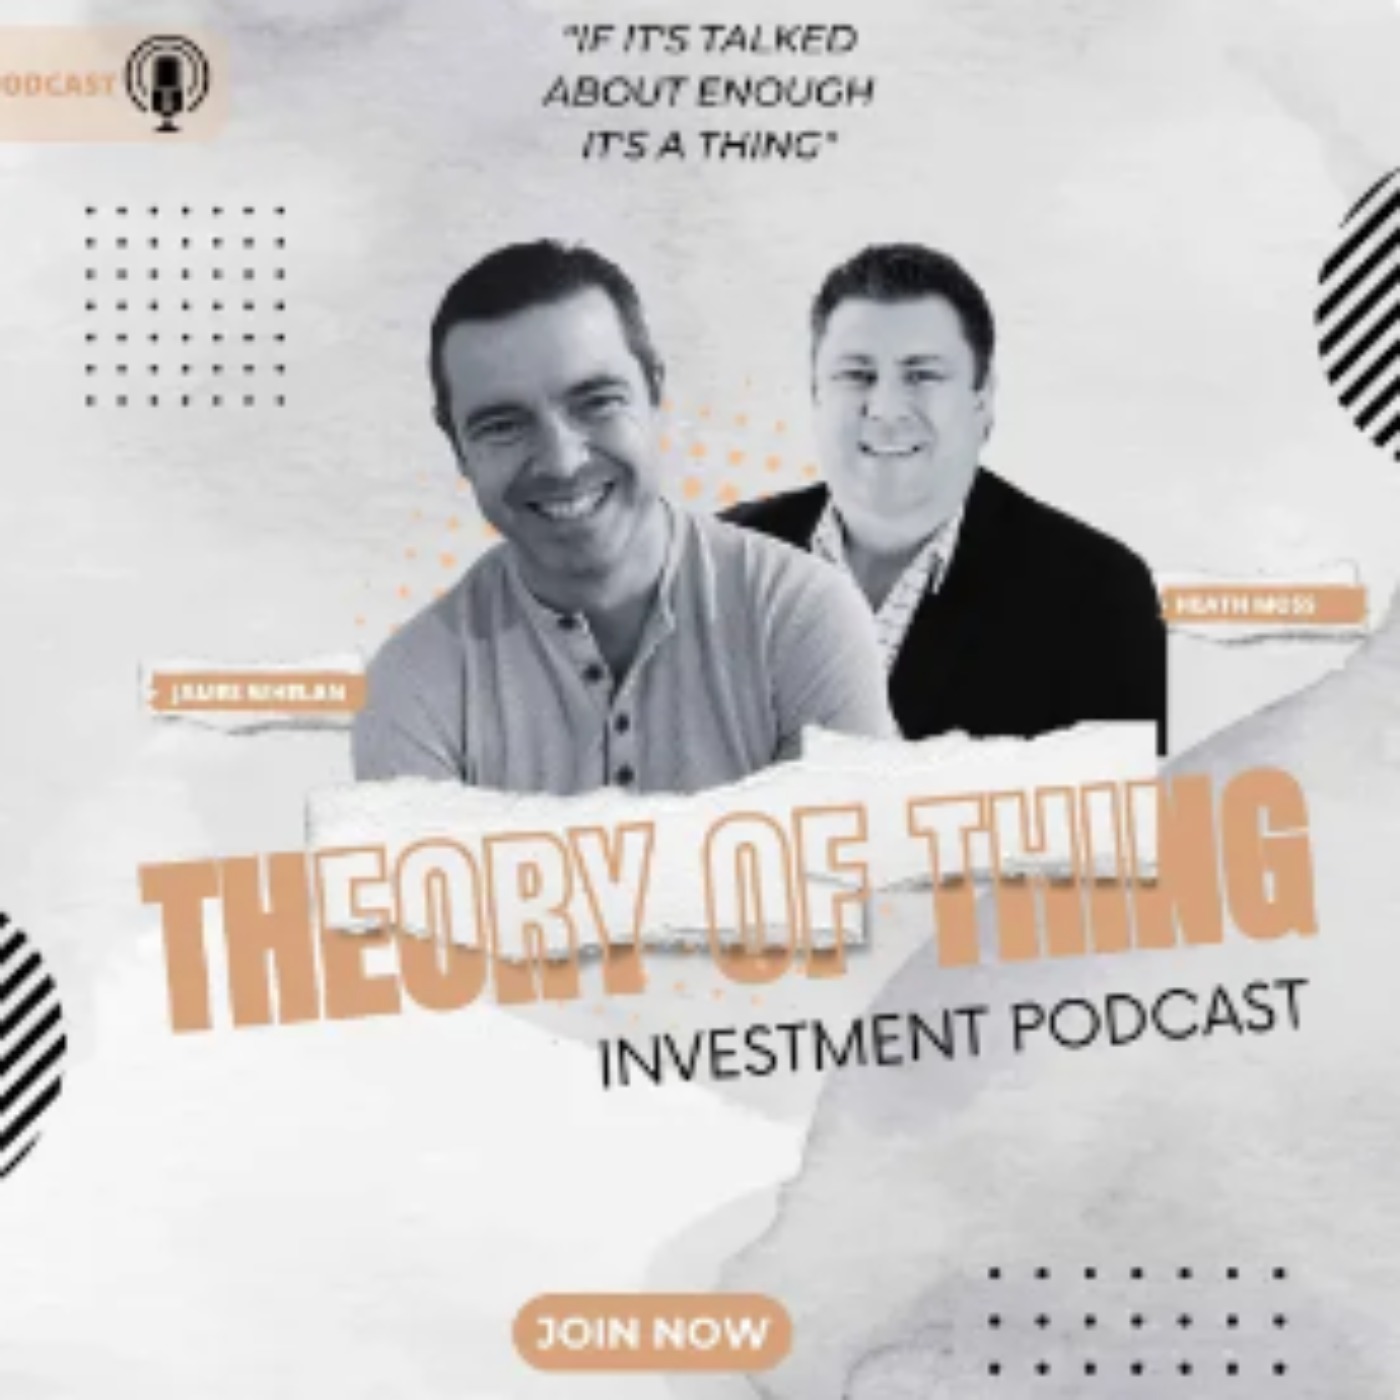 Episode 33 of "The Theory of Thing Investment Podcast"!